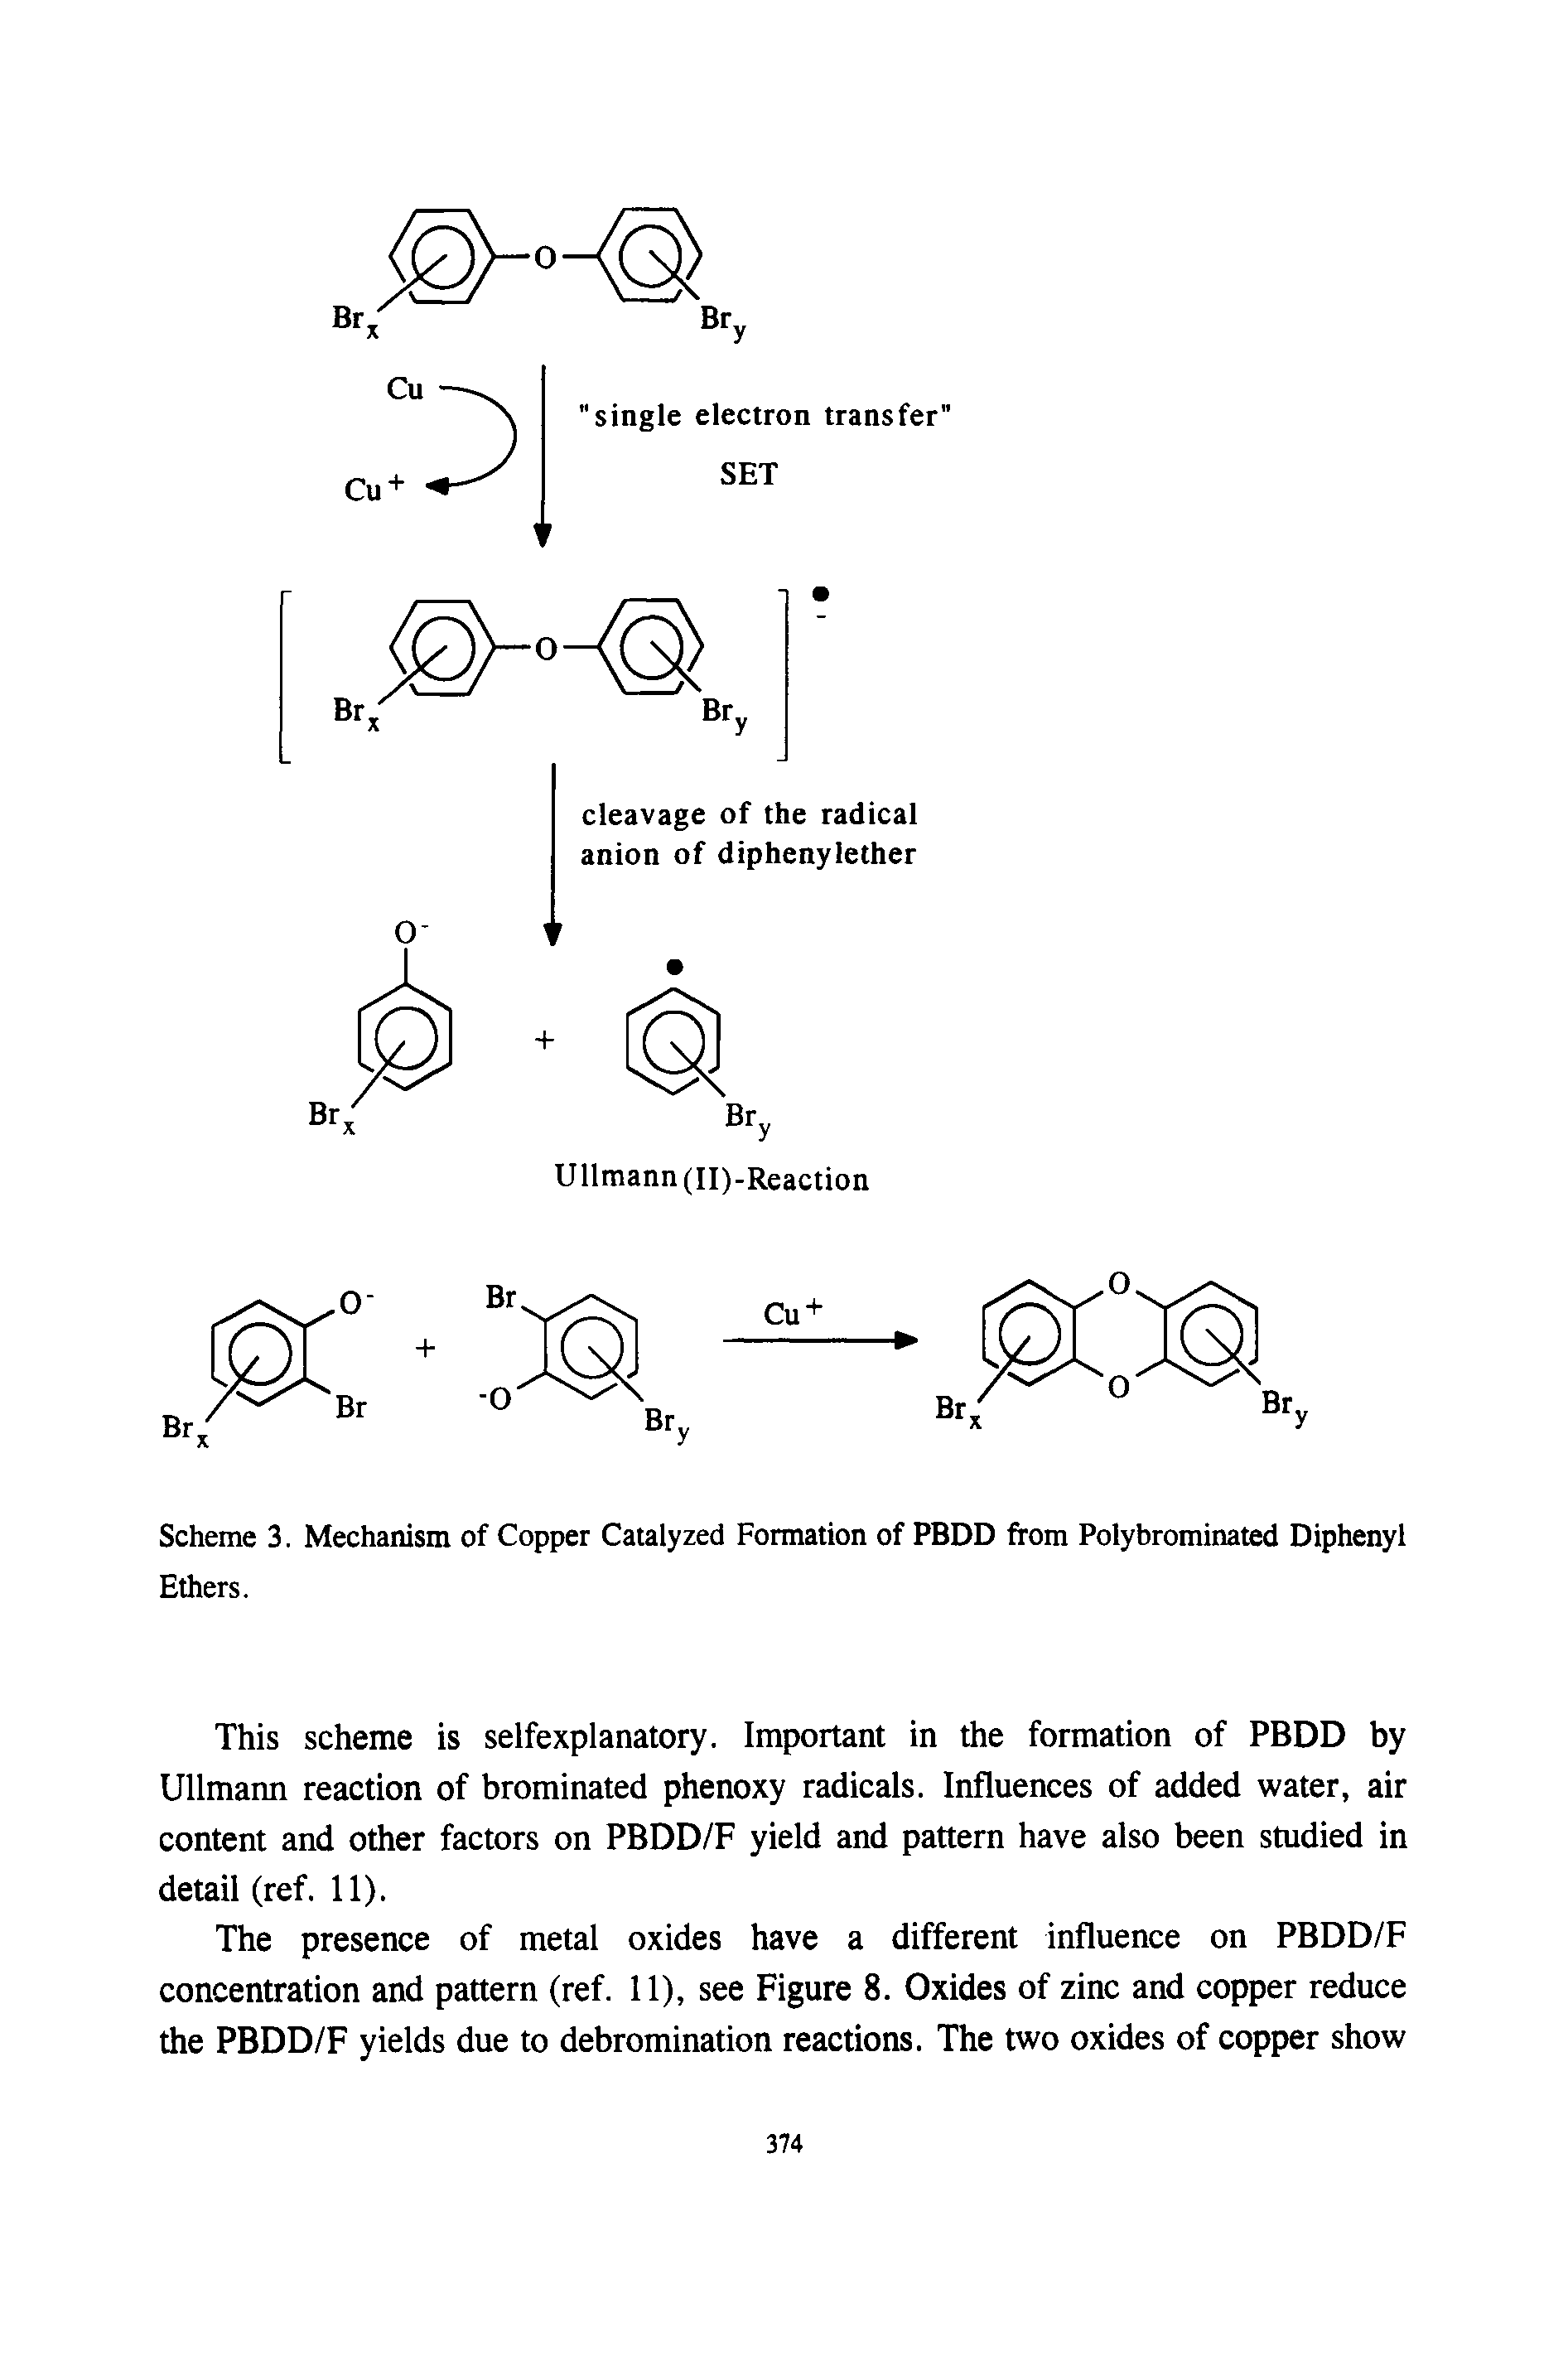 Scheme 3. Mechanism of Copper Catalyzed Formation of PBDD from Polybrominated Diphenyl Ethers.